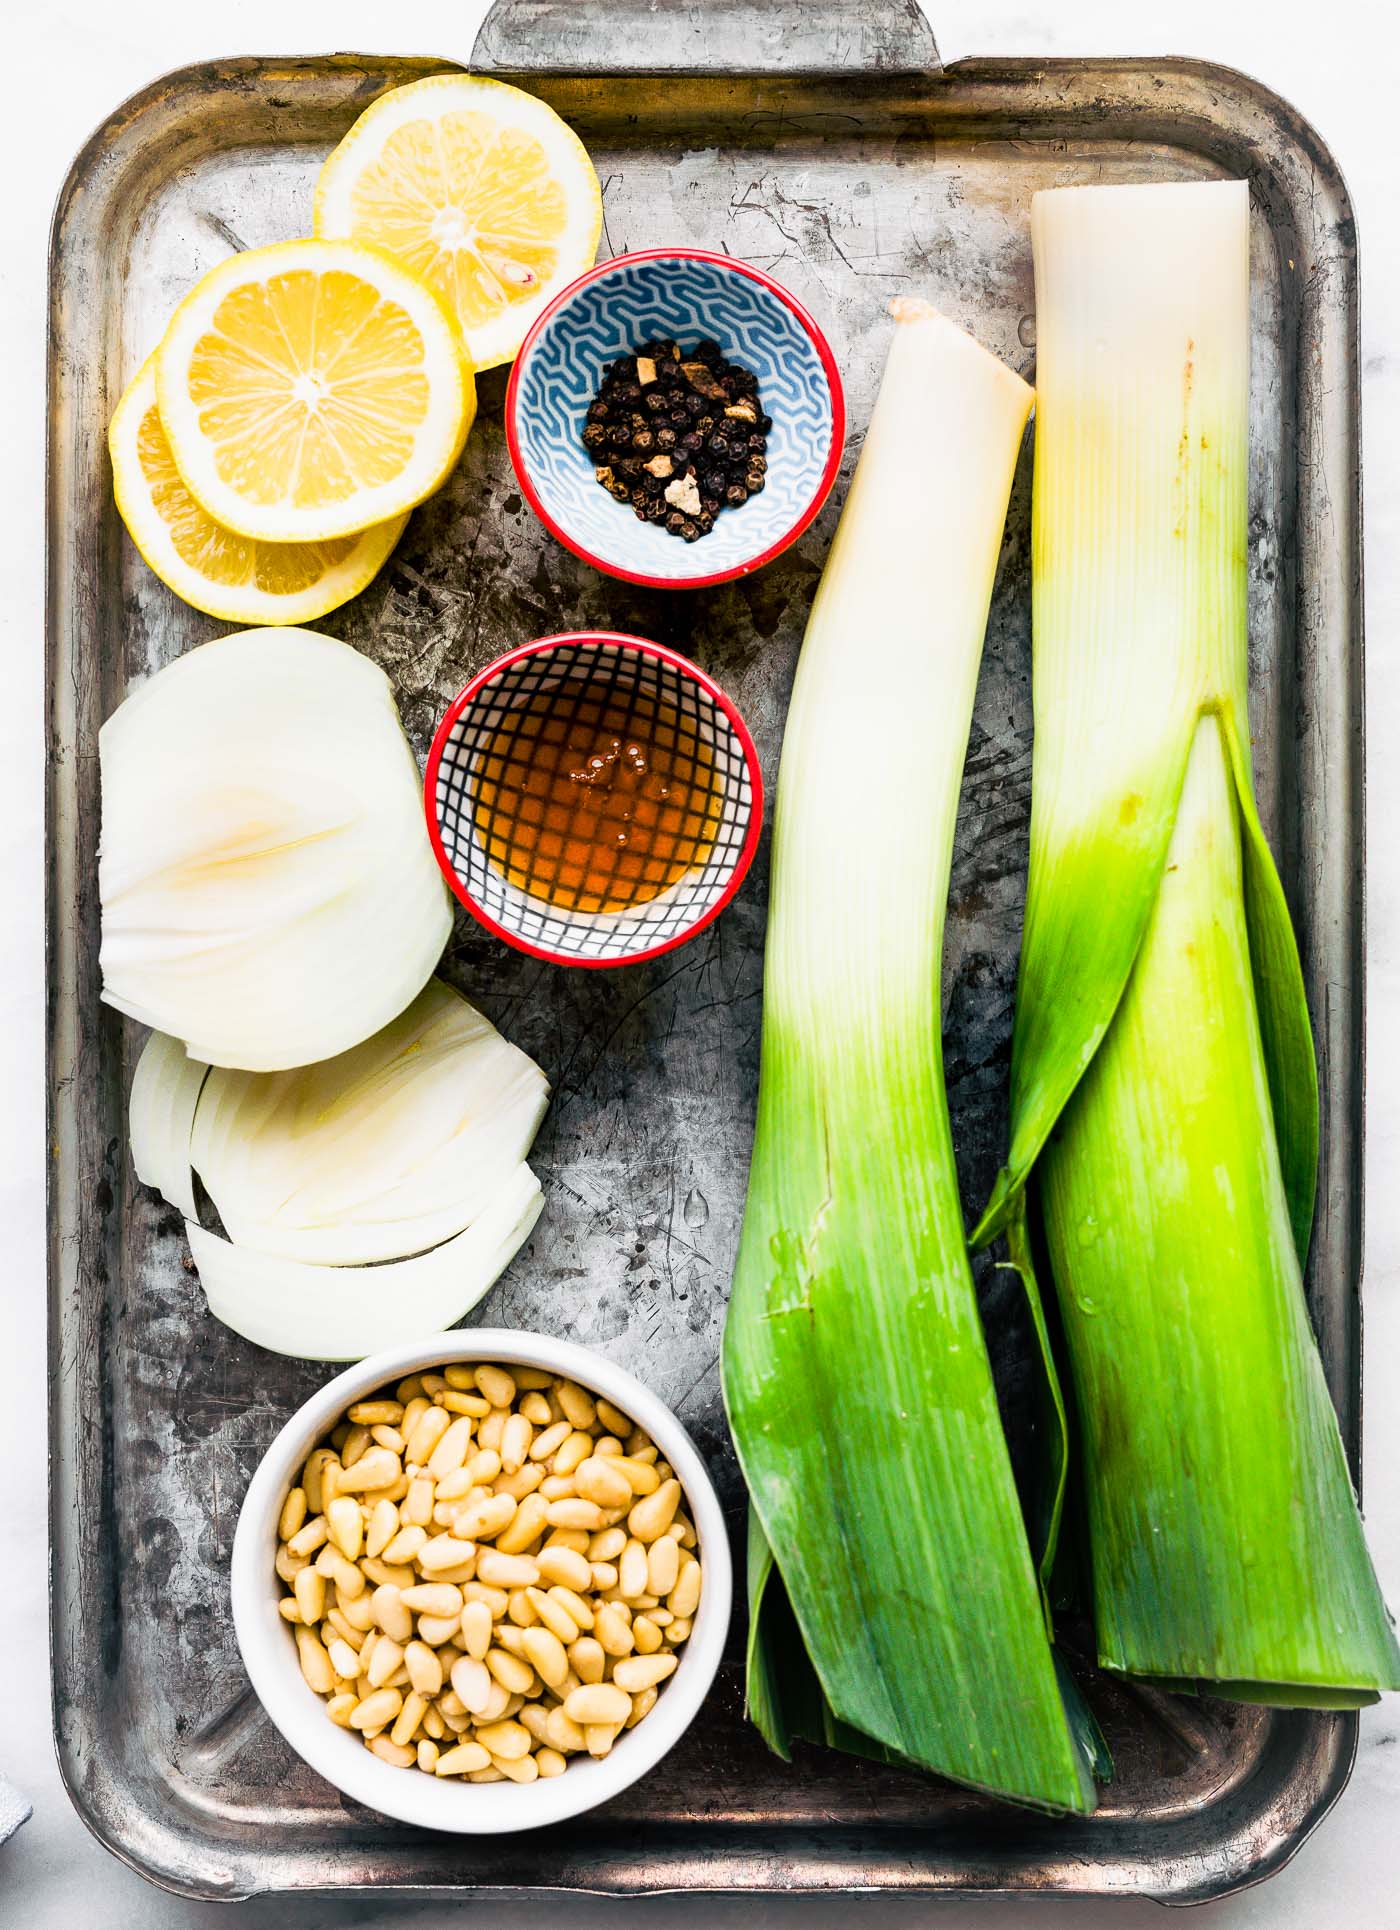 All ingredients for quinoa salad with leeks and pine nuts in a silver tray.